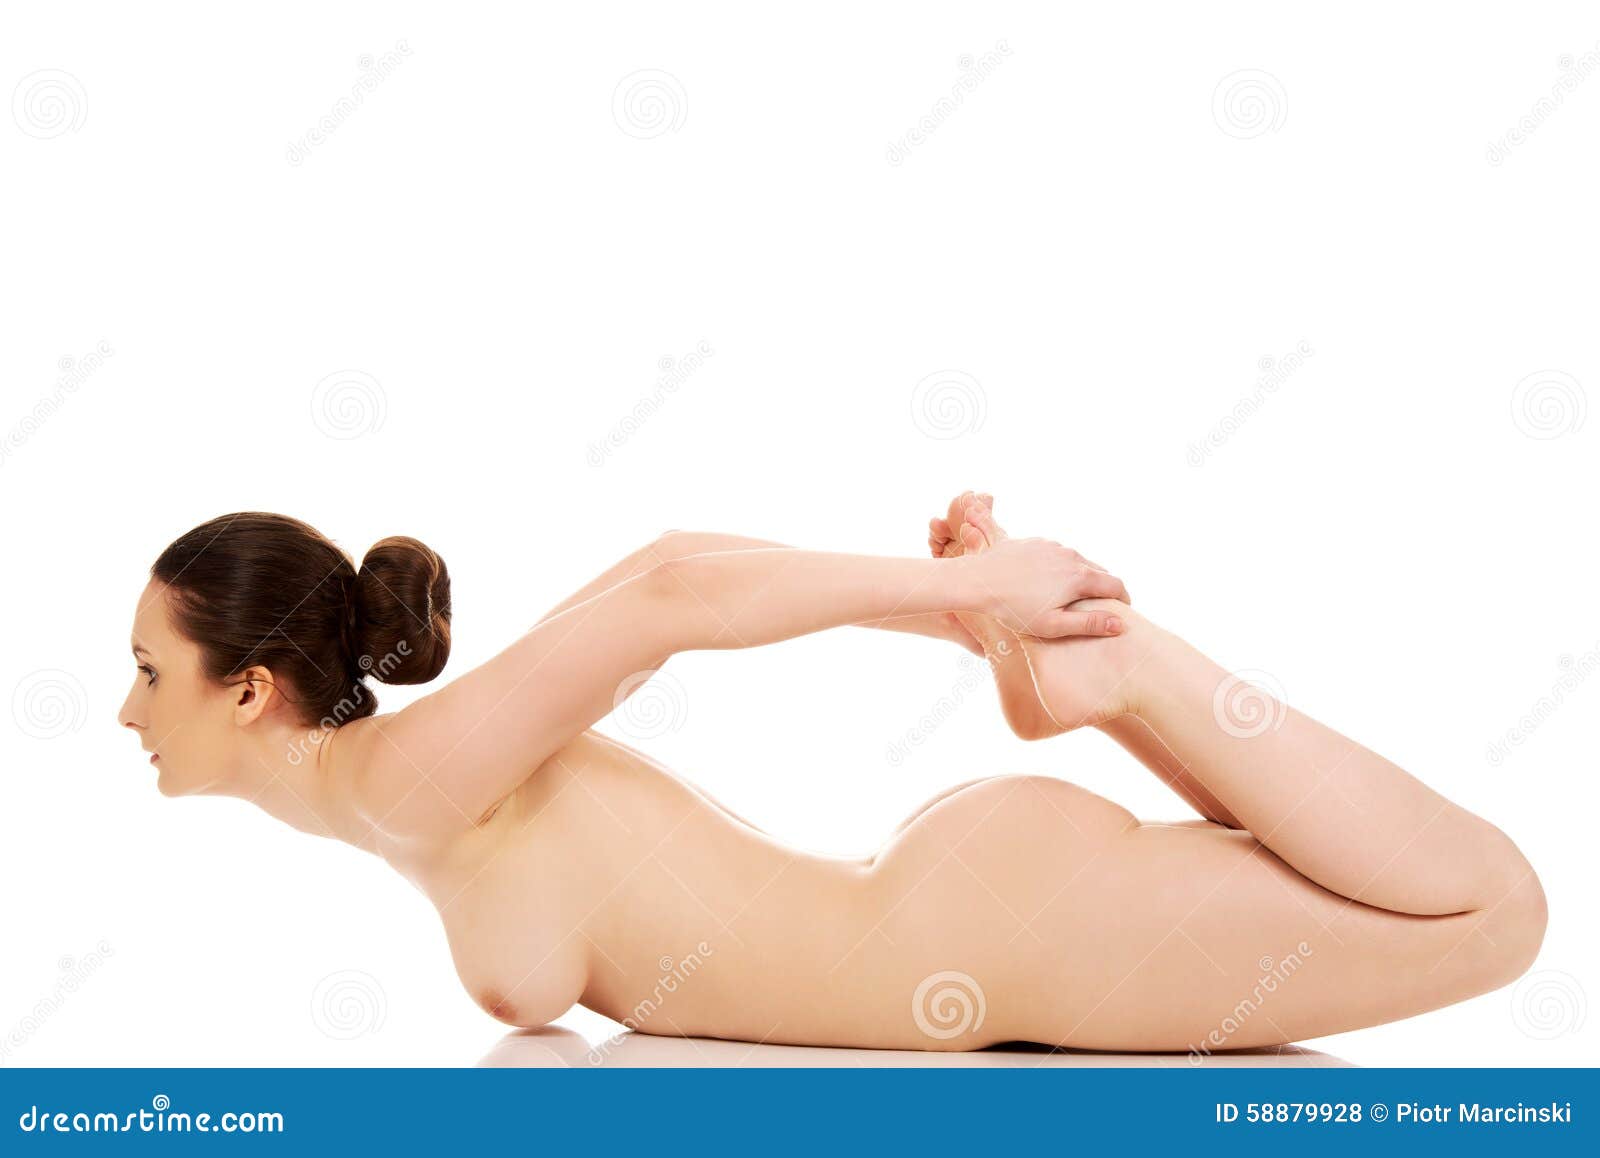 calvin sherman recommends nude yoga moves pic